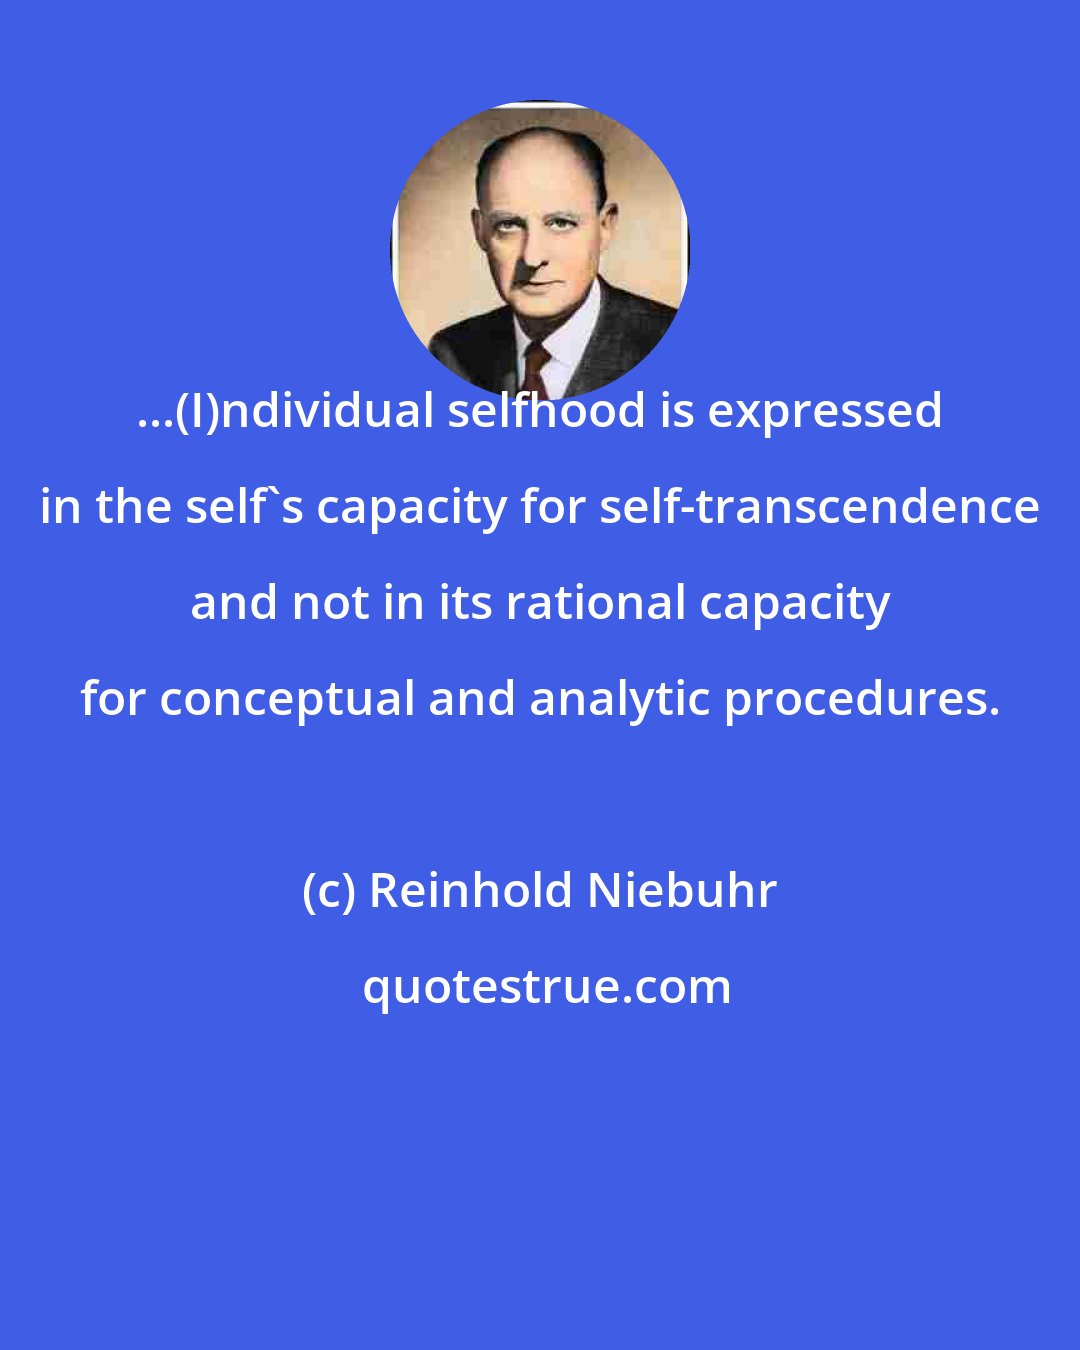 Reinhold Niebuhr: ...(I)ndividual selfhood is expressed in the self's capacity for self-transcendence and not in its rational capacity for conceptual and analytic procedures.